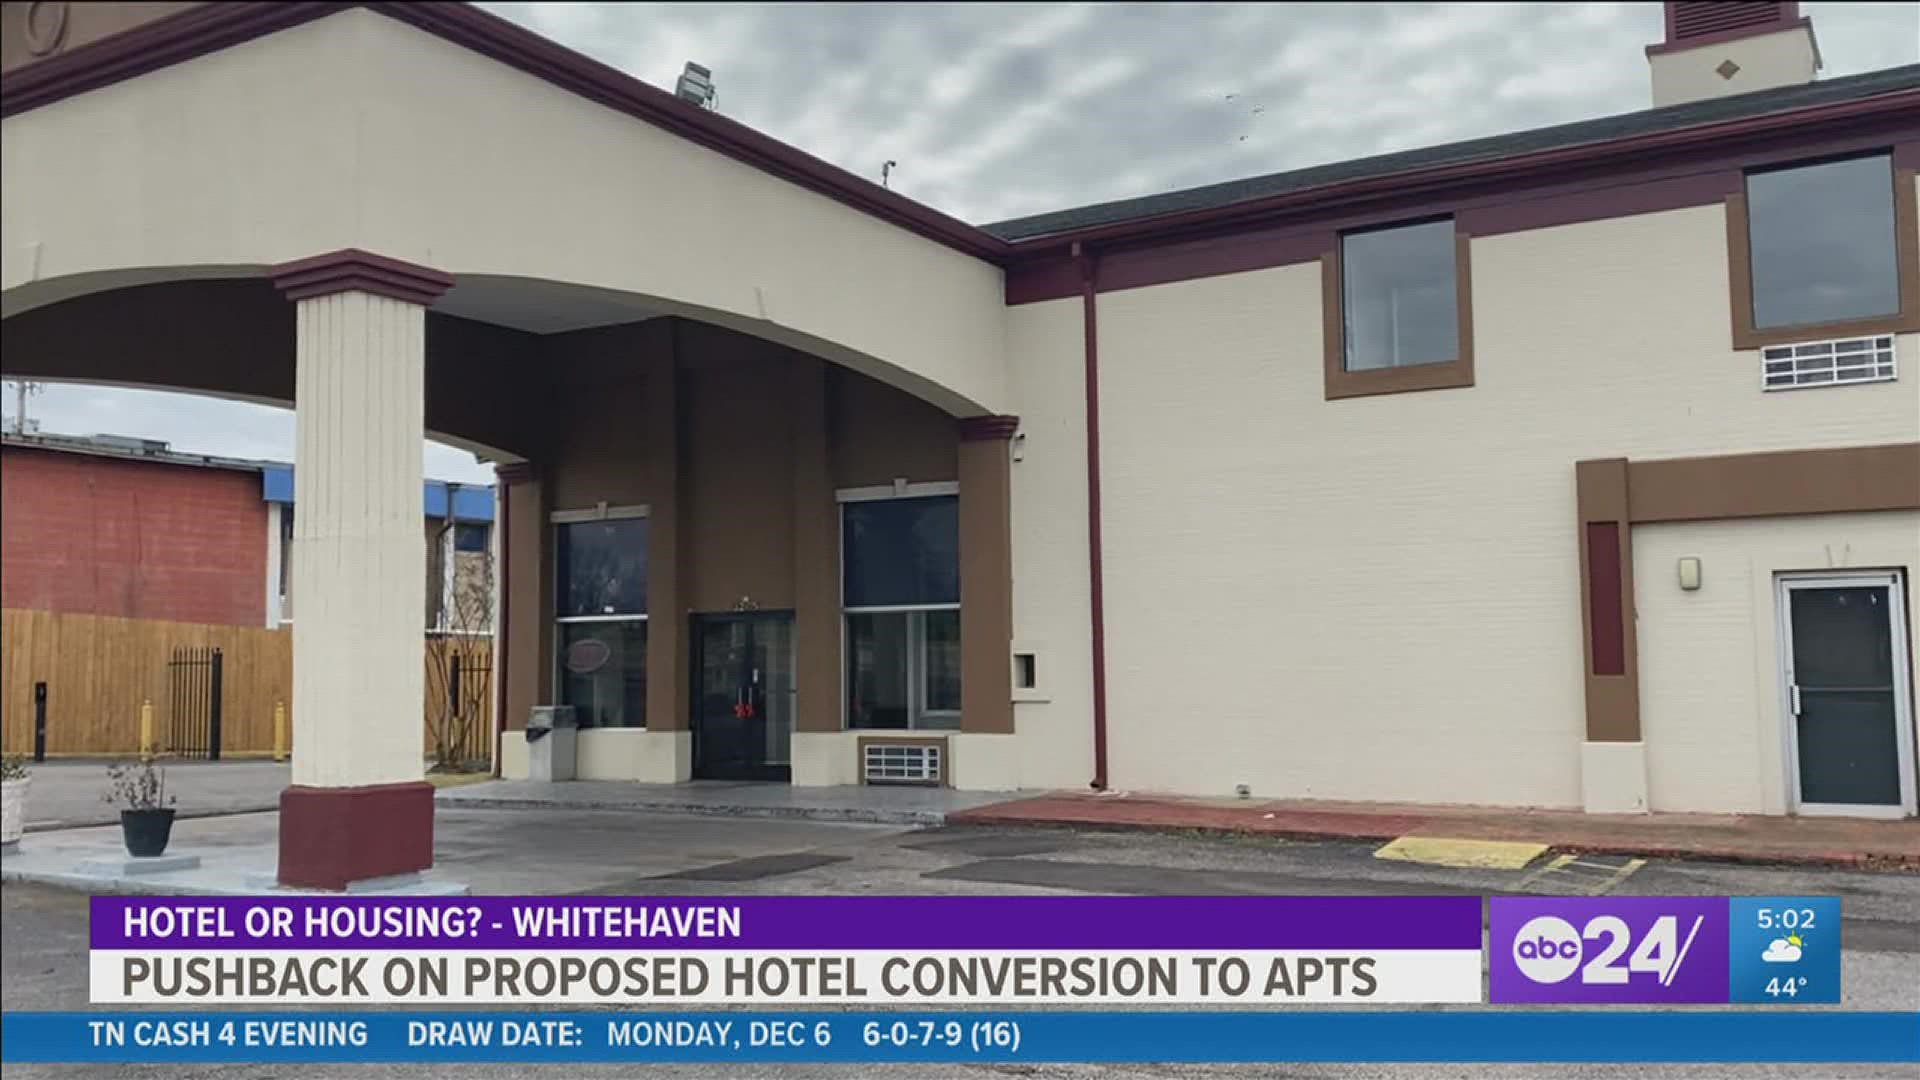 About 300 people signed a petition opposing a project that would turn the Red Roof Inn on Elvis Presley Blvd into a month-to-month low-income apartment complex.